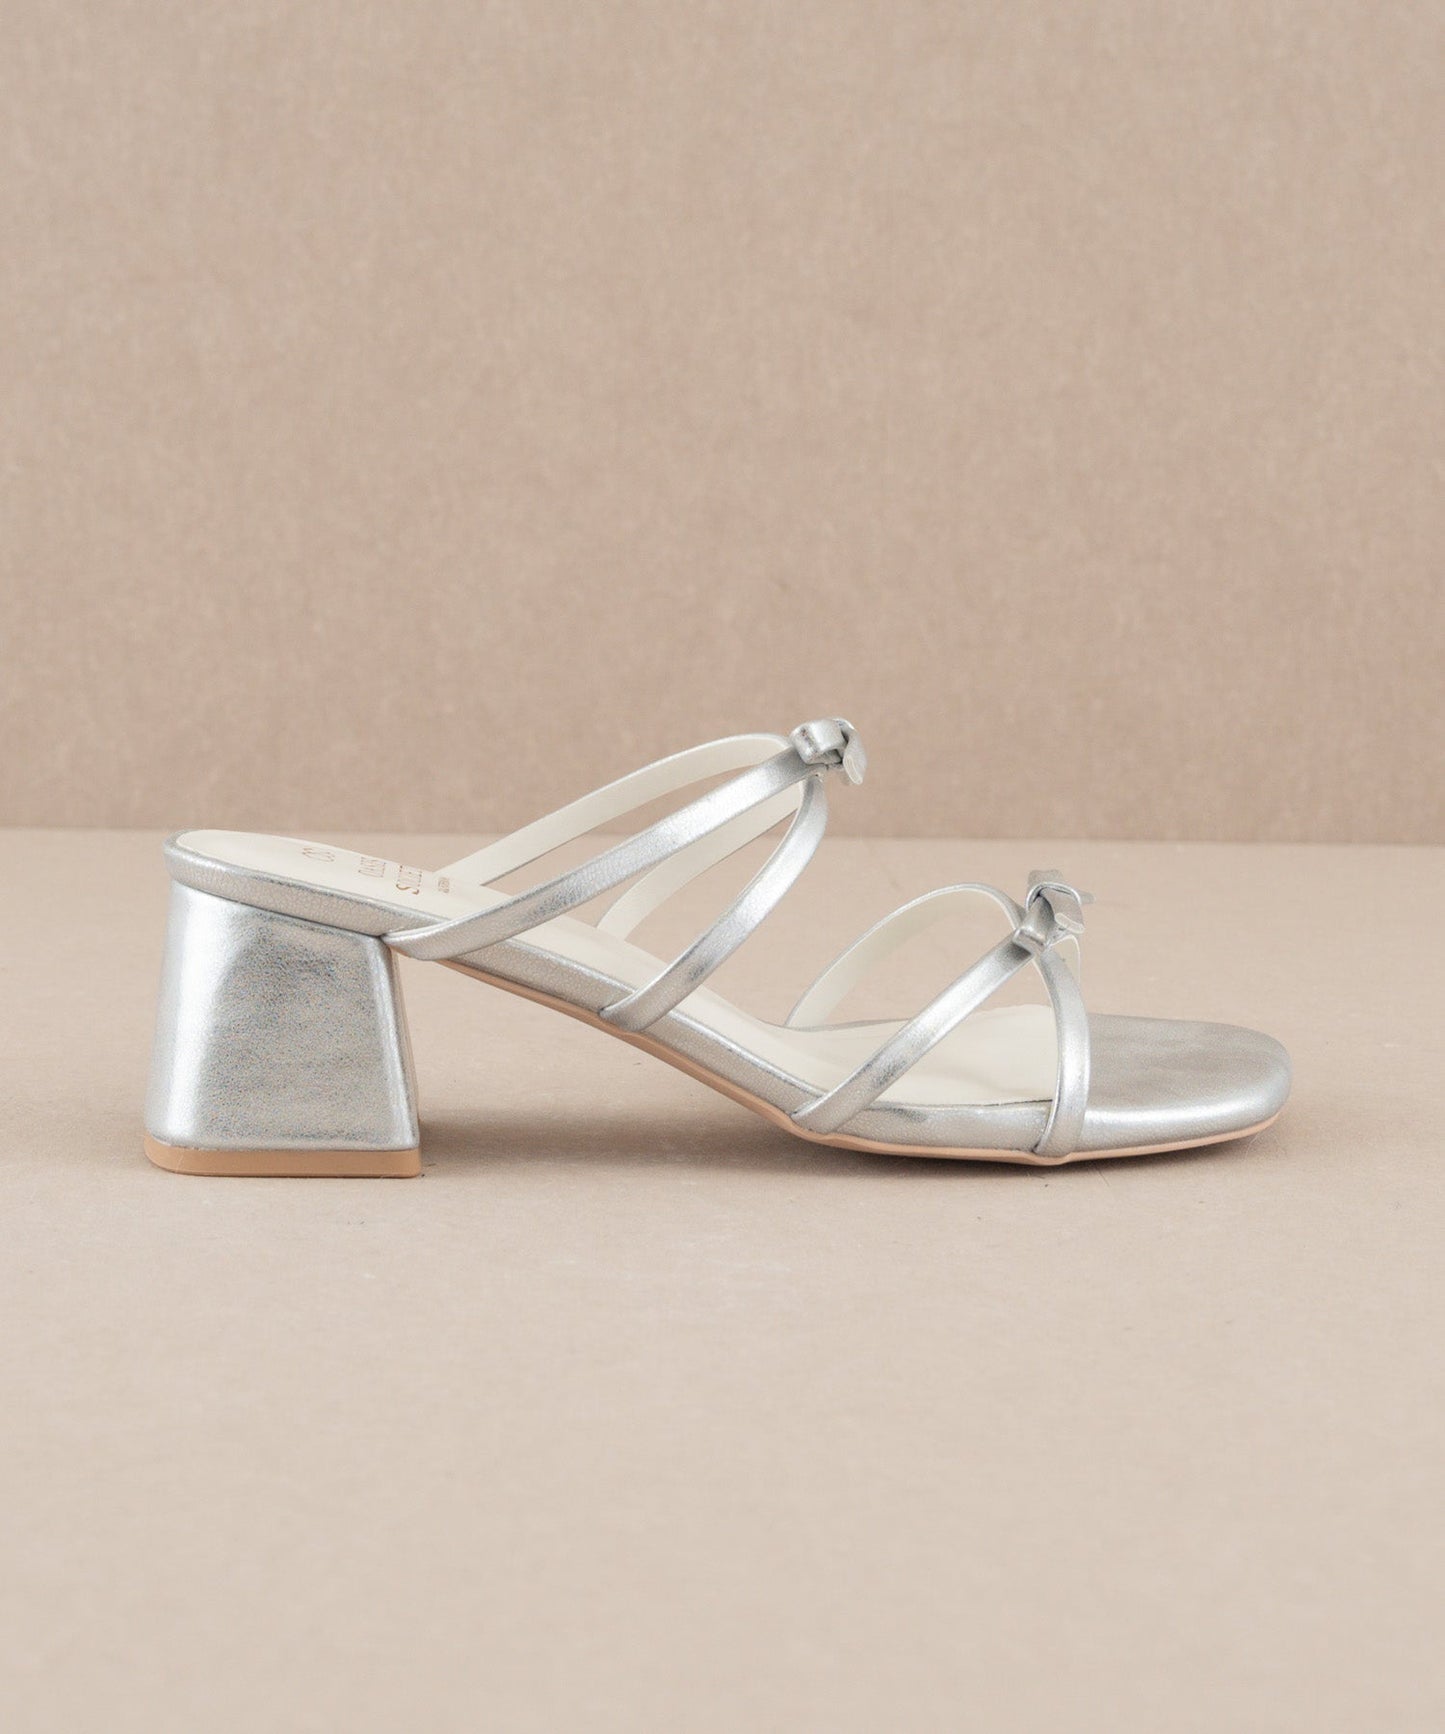 The Maci | Silver Strappy Heel with Bow Details